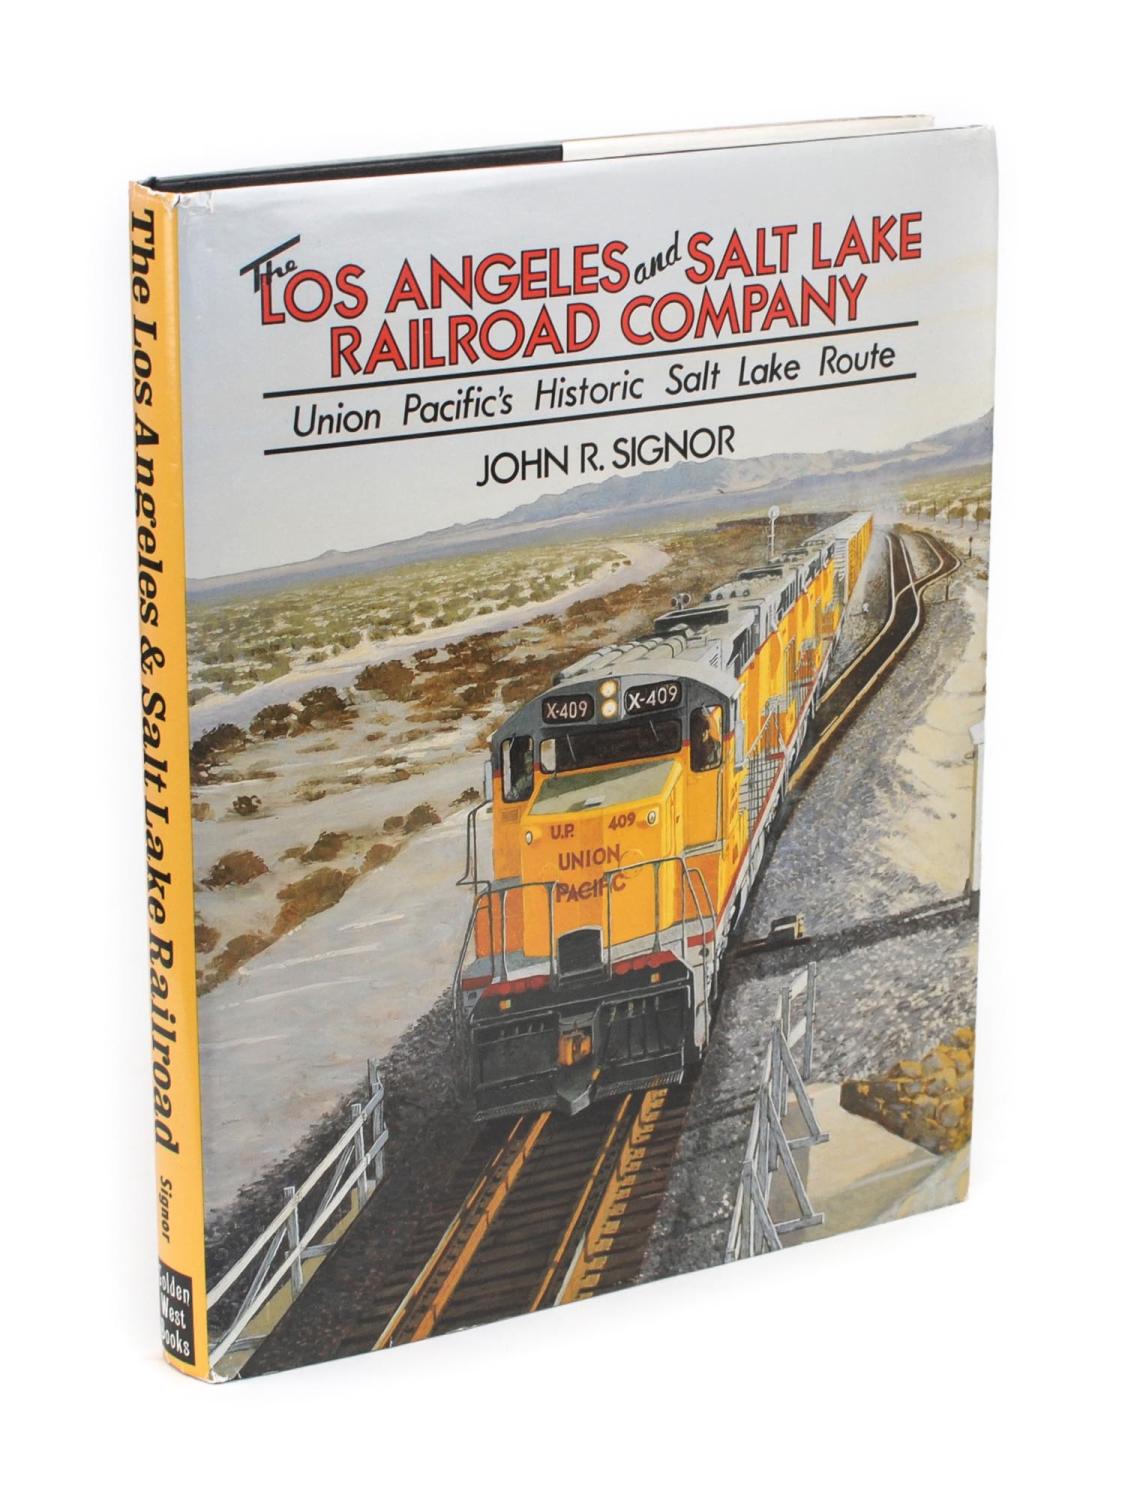 The Los Angeles and Salt Lake Railroad Company. Union Pacific's Historic Salt Lake Route